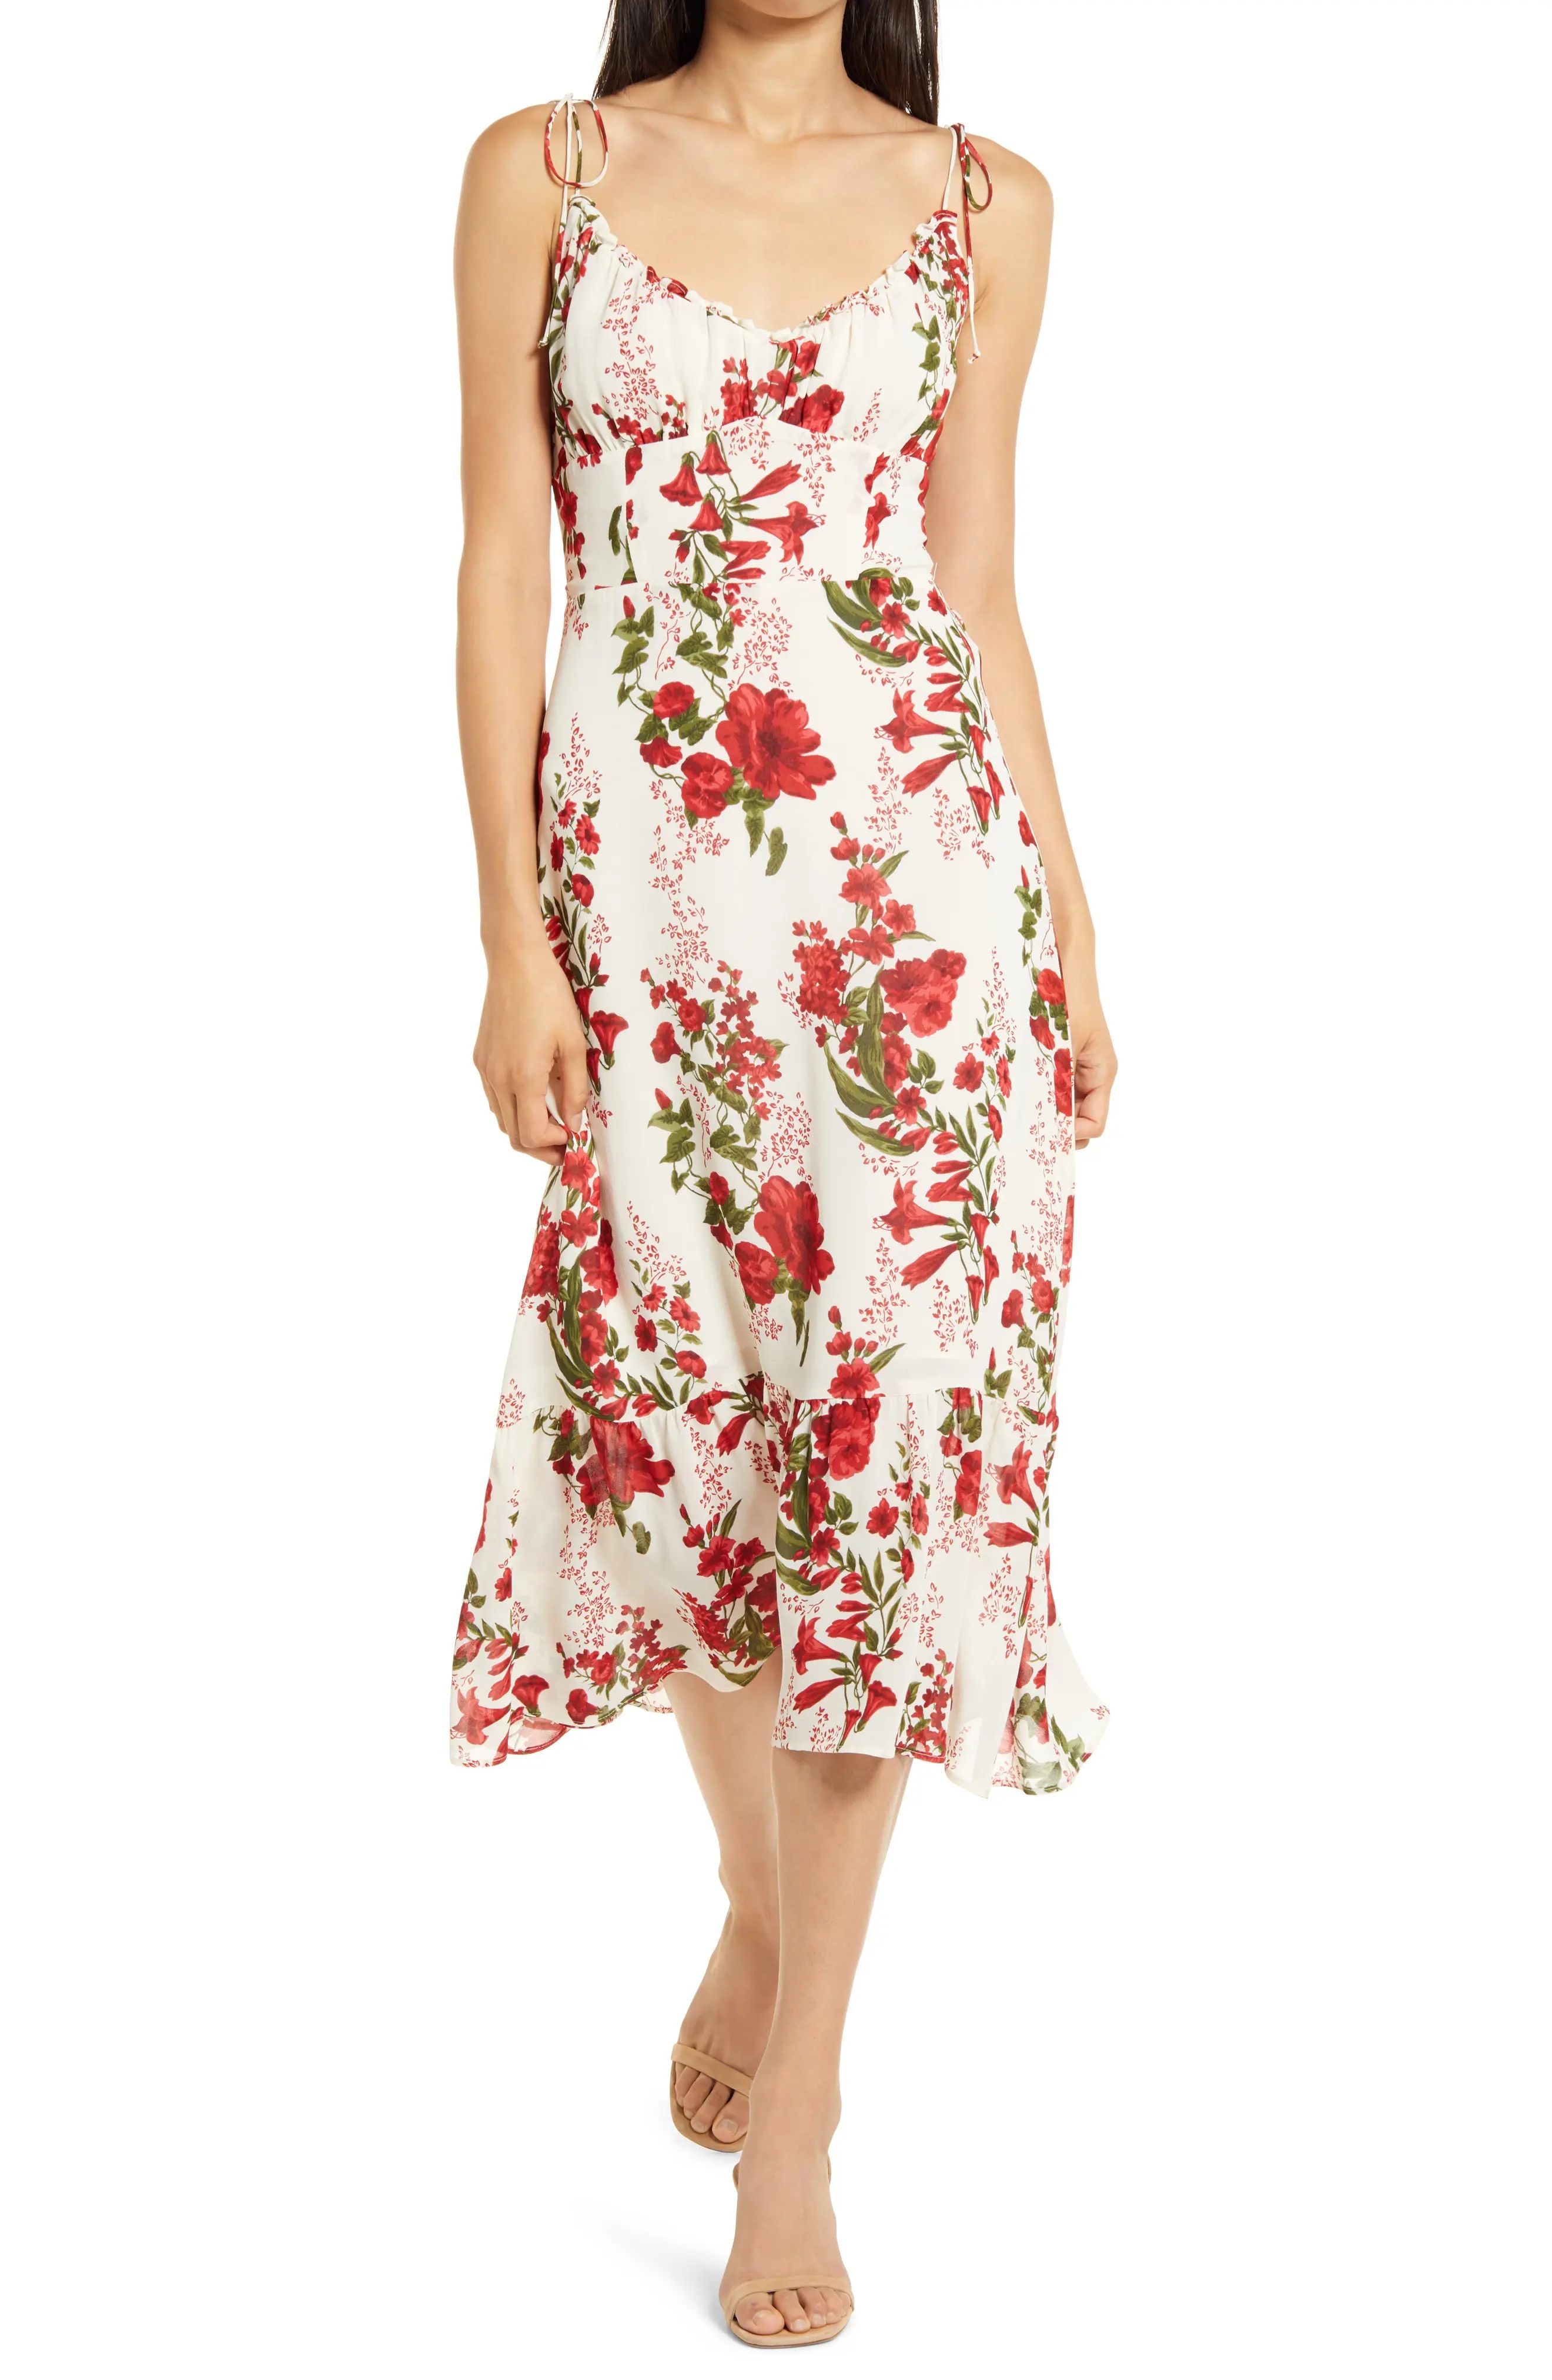 Women's Reformation Embry Floral Midi Dress, Size 2 - White | Nordstrom